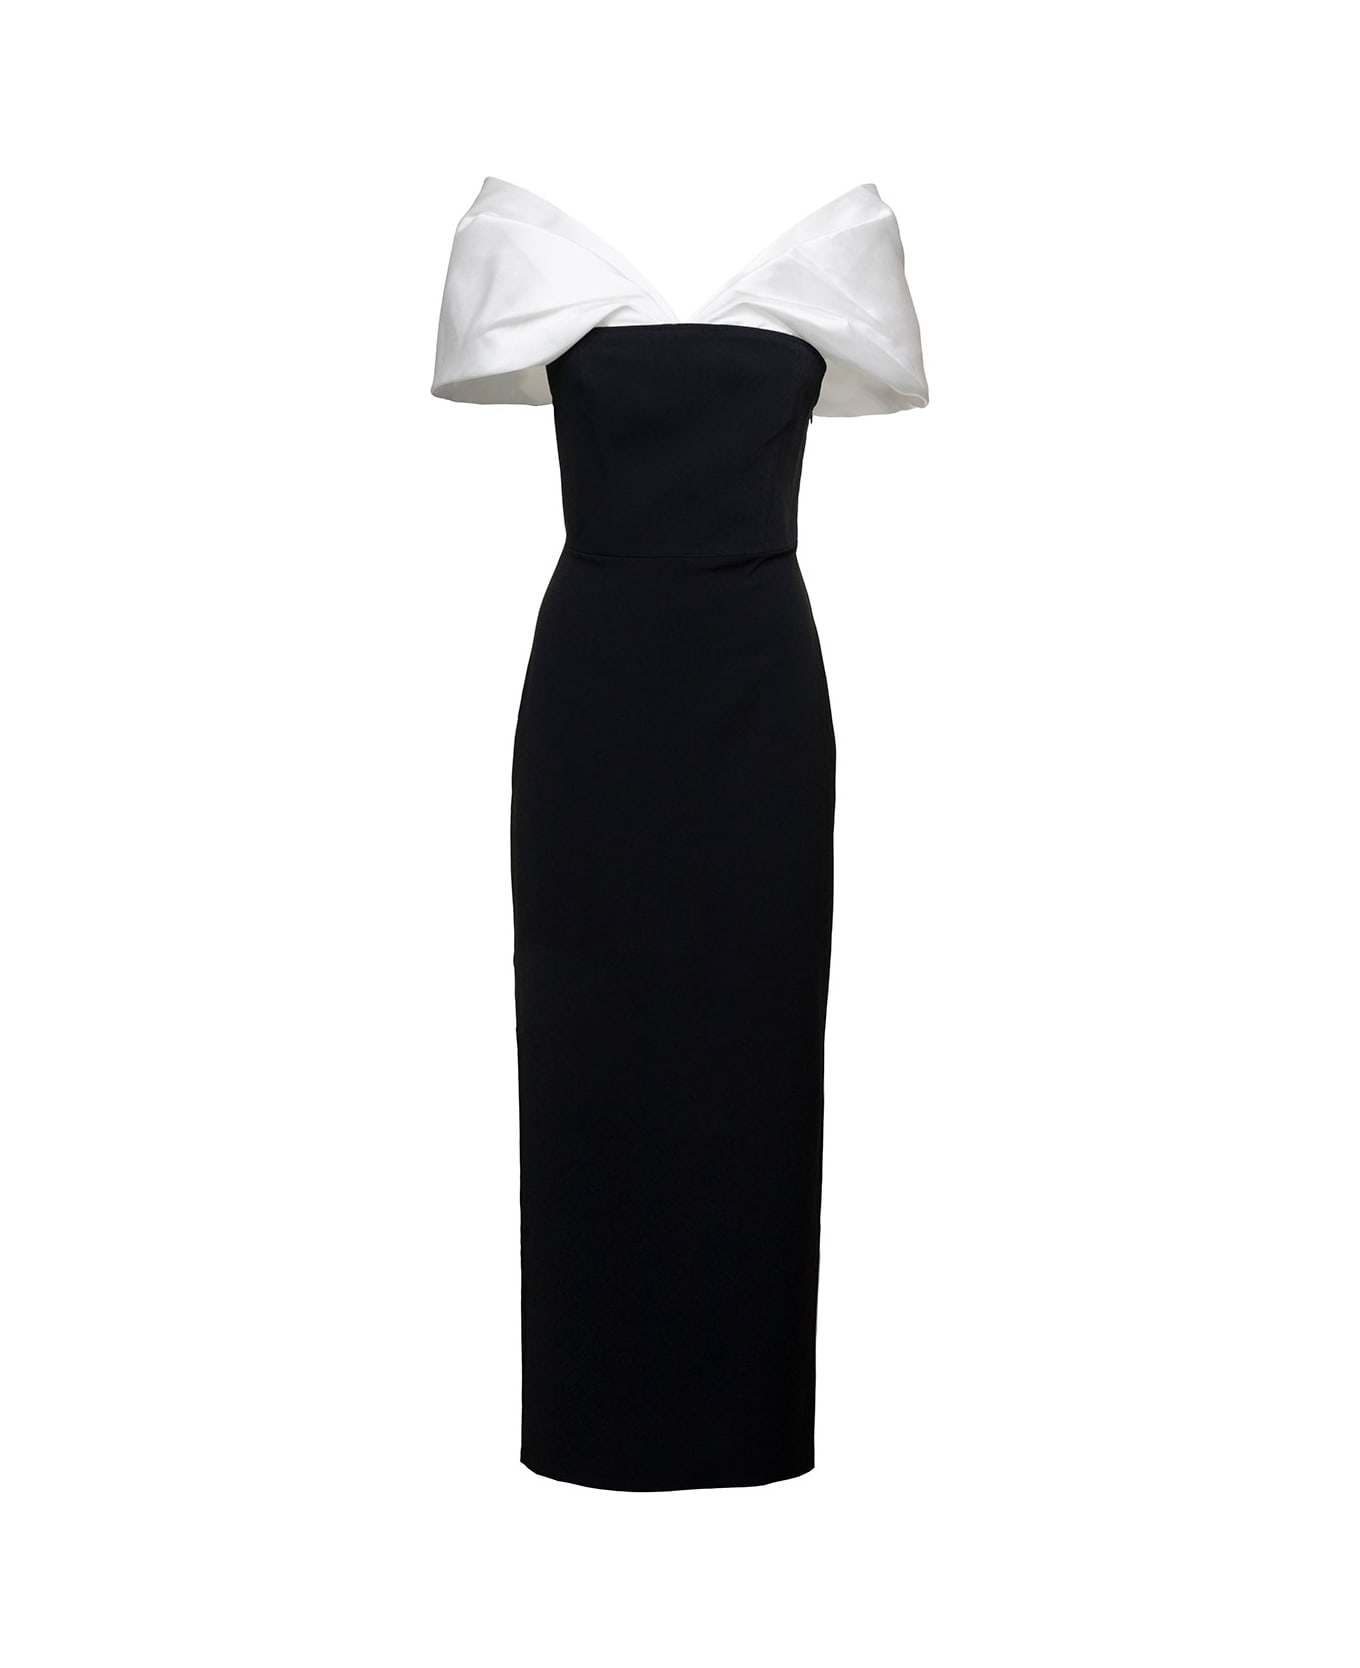 Solace London 'dakota' Maxi Black Dress With Off-shoulder Neckline And Satin Inserts In Polyester Woman - Black